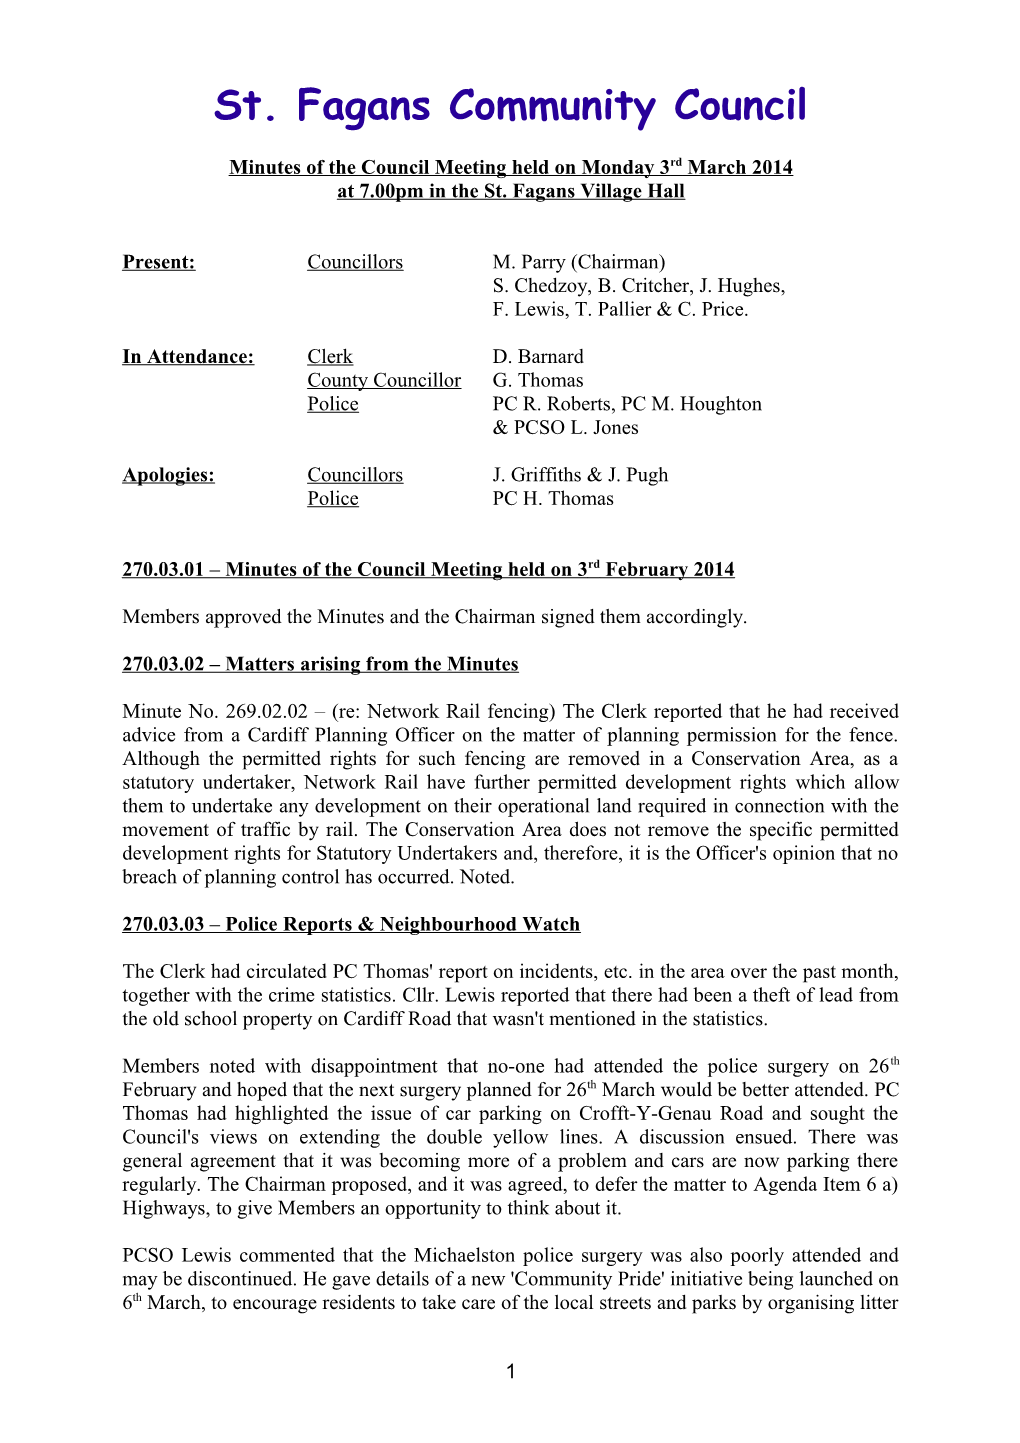 Minutes of the Council Meeting Held on Monday 3Rd March 2014